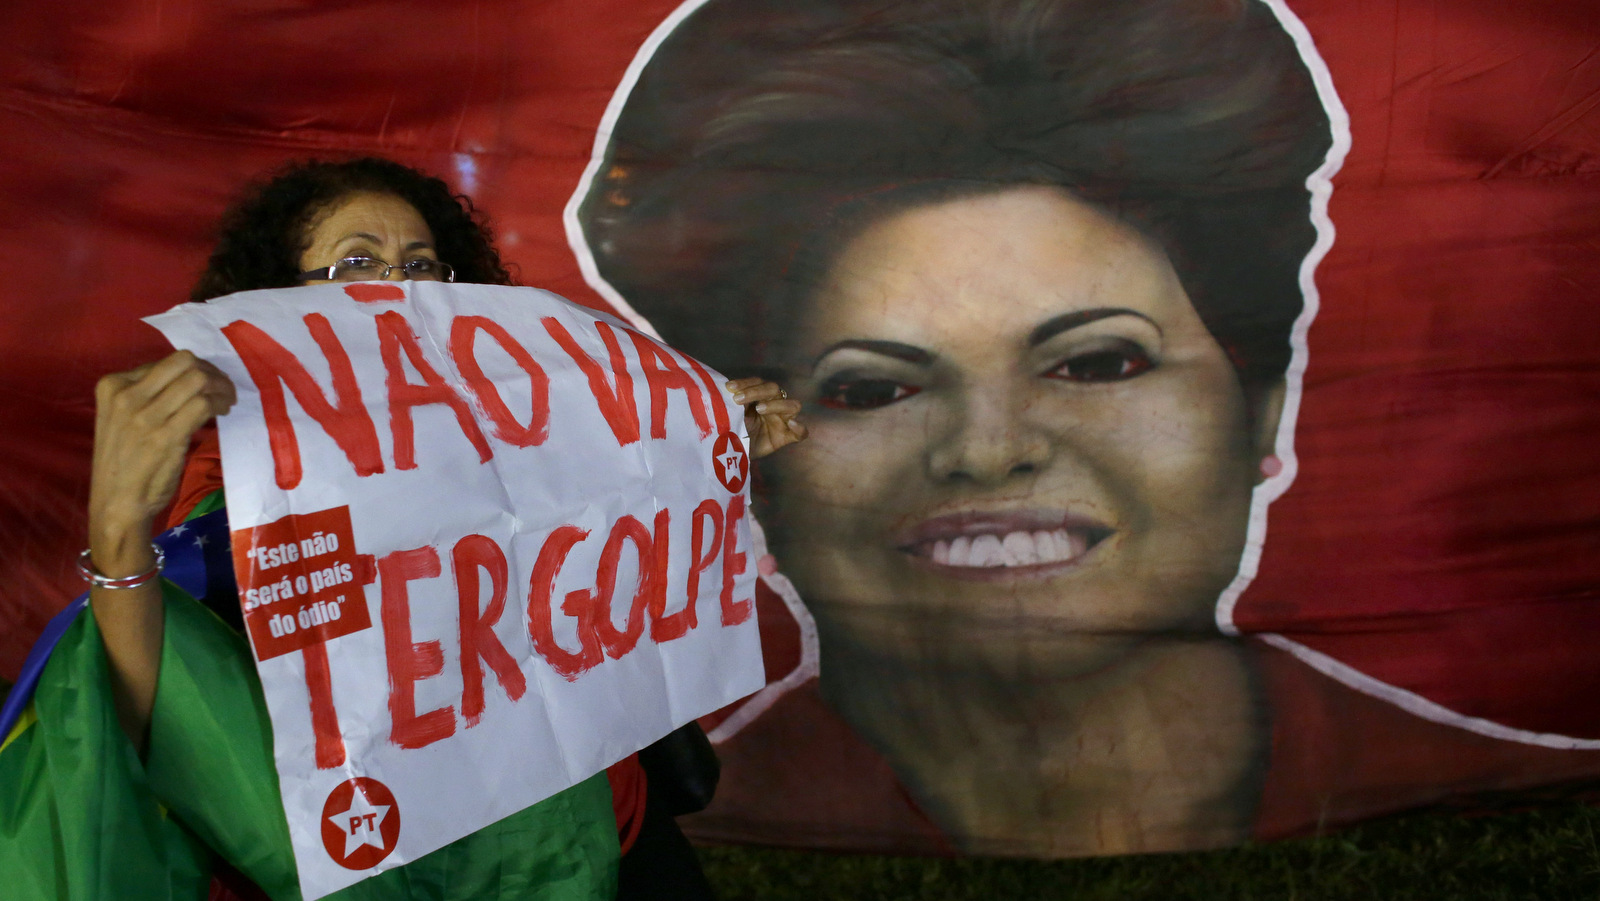 Woman shows poster written in Portuguese "There will not be a coup" next to a picture of Brazil's President Dilma Rousseff, during a rally in her support and of former President Luiz Inacio Lula da Silva, in Brasilia, Brazil, Friday, March 18, 2016. Supporters of Silva and Rousseff gathered for rallies in a handful of cities across Brazil, particularly in the industrial south, where the former factory worker has his base. Silva has tageted in an alleged corruption investigation involving the Brazil oil giant Petrobras. (AP Photo/Eraldo Peres)